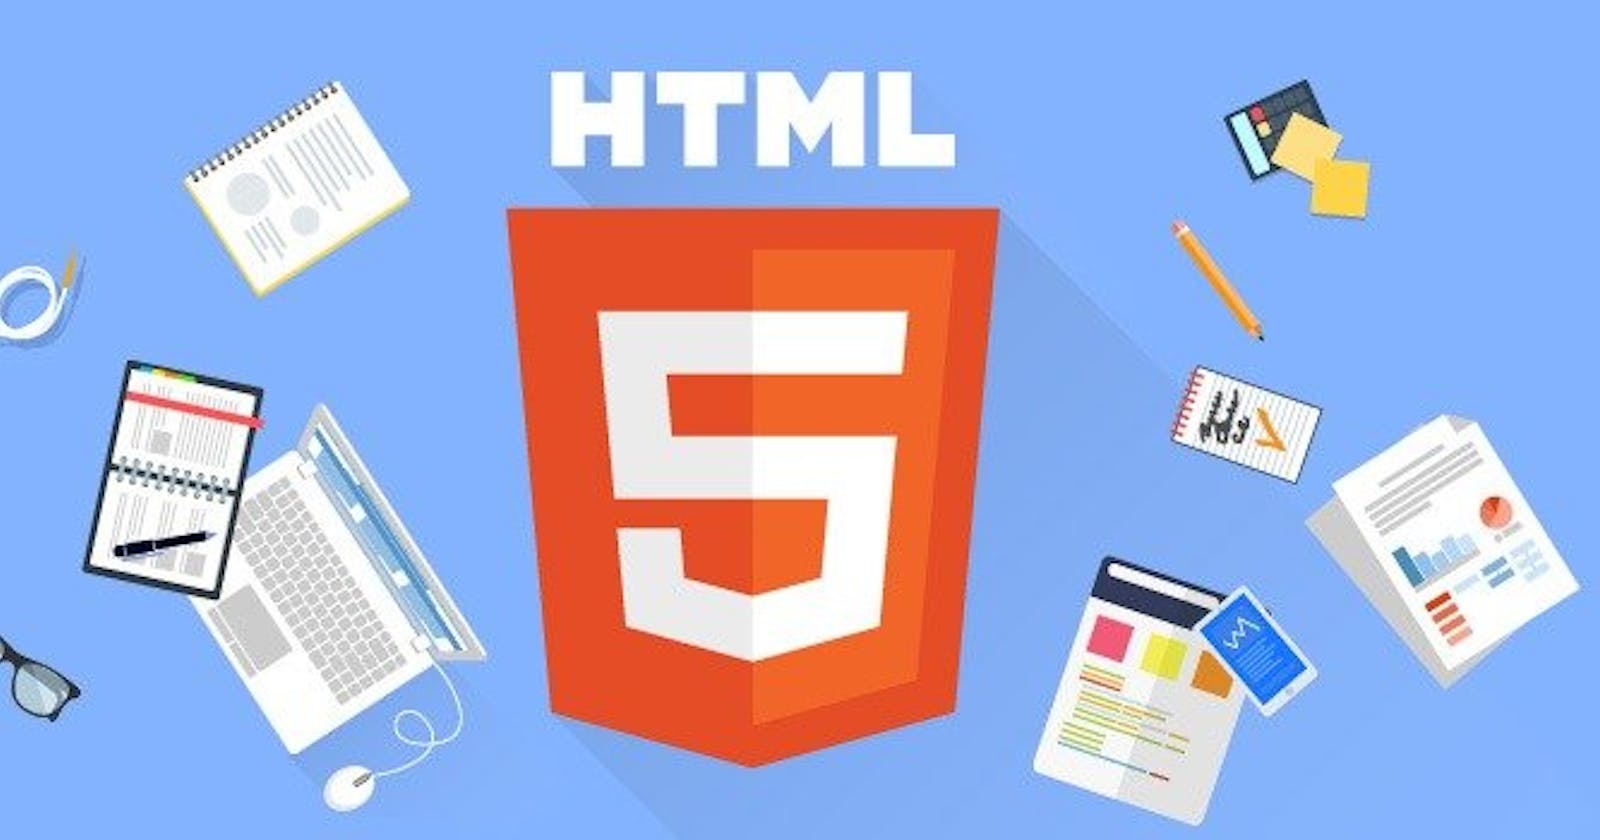 More About HTML